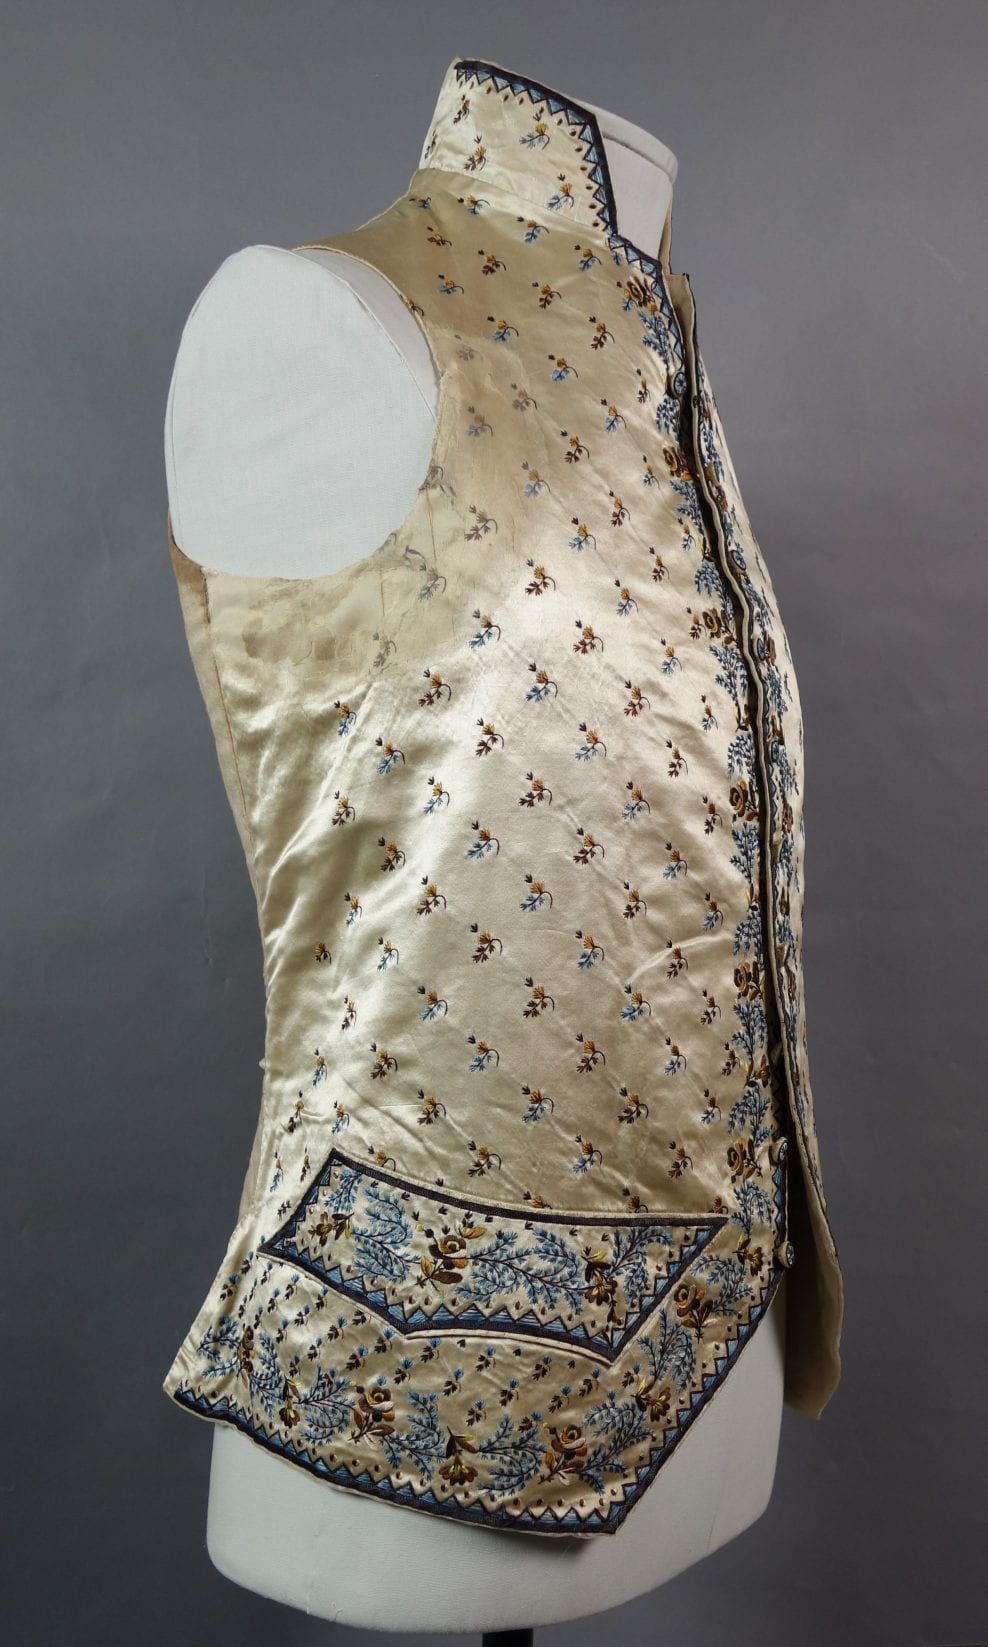 Conservation and mounting of costume and textiles for Dorset Museum ...